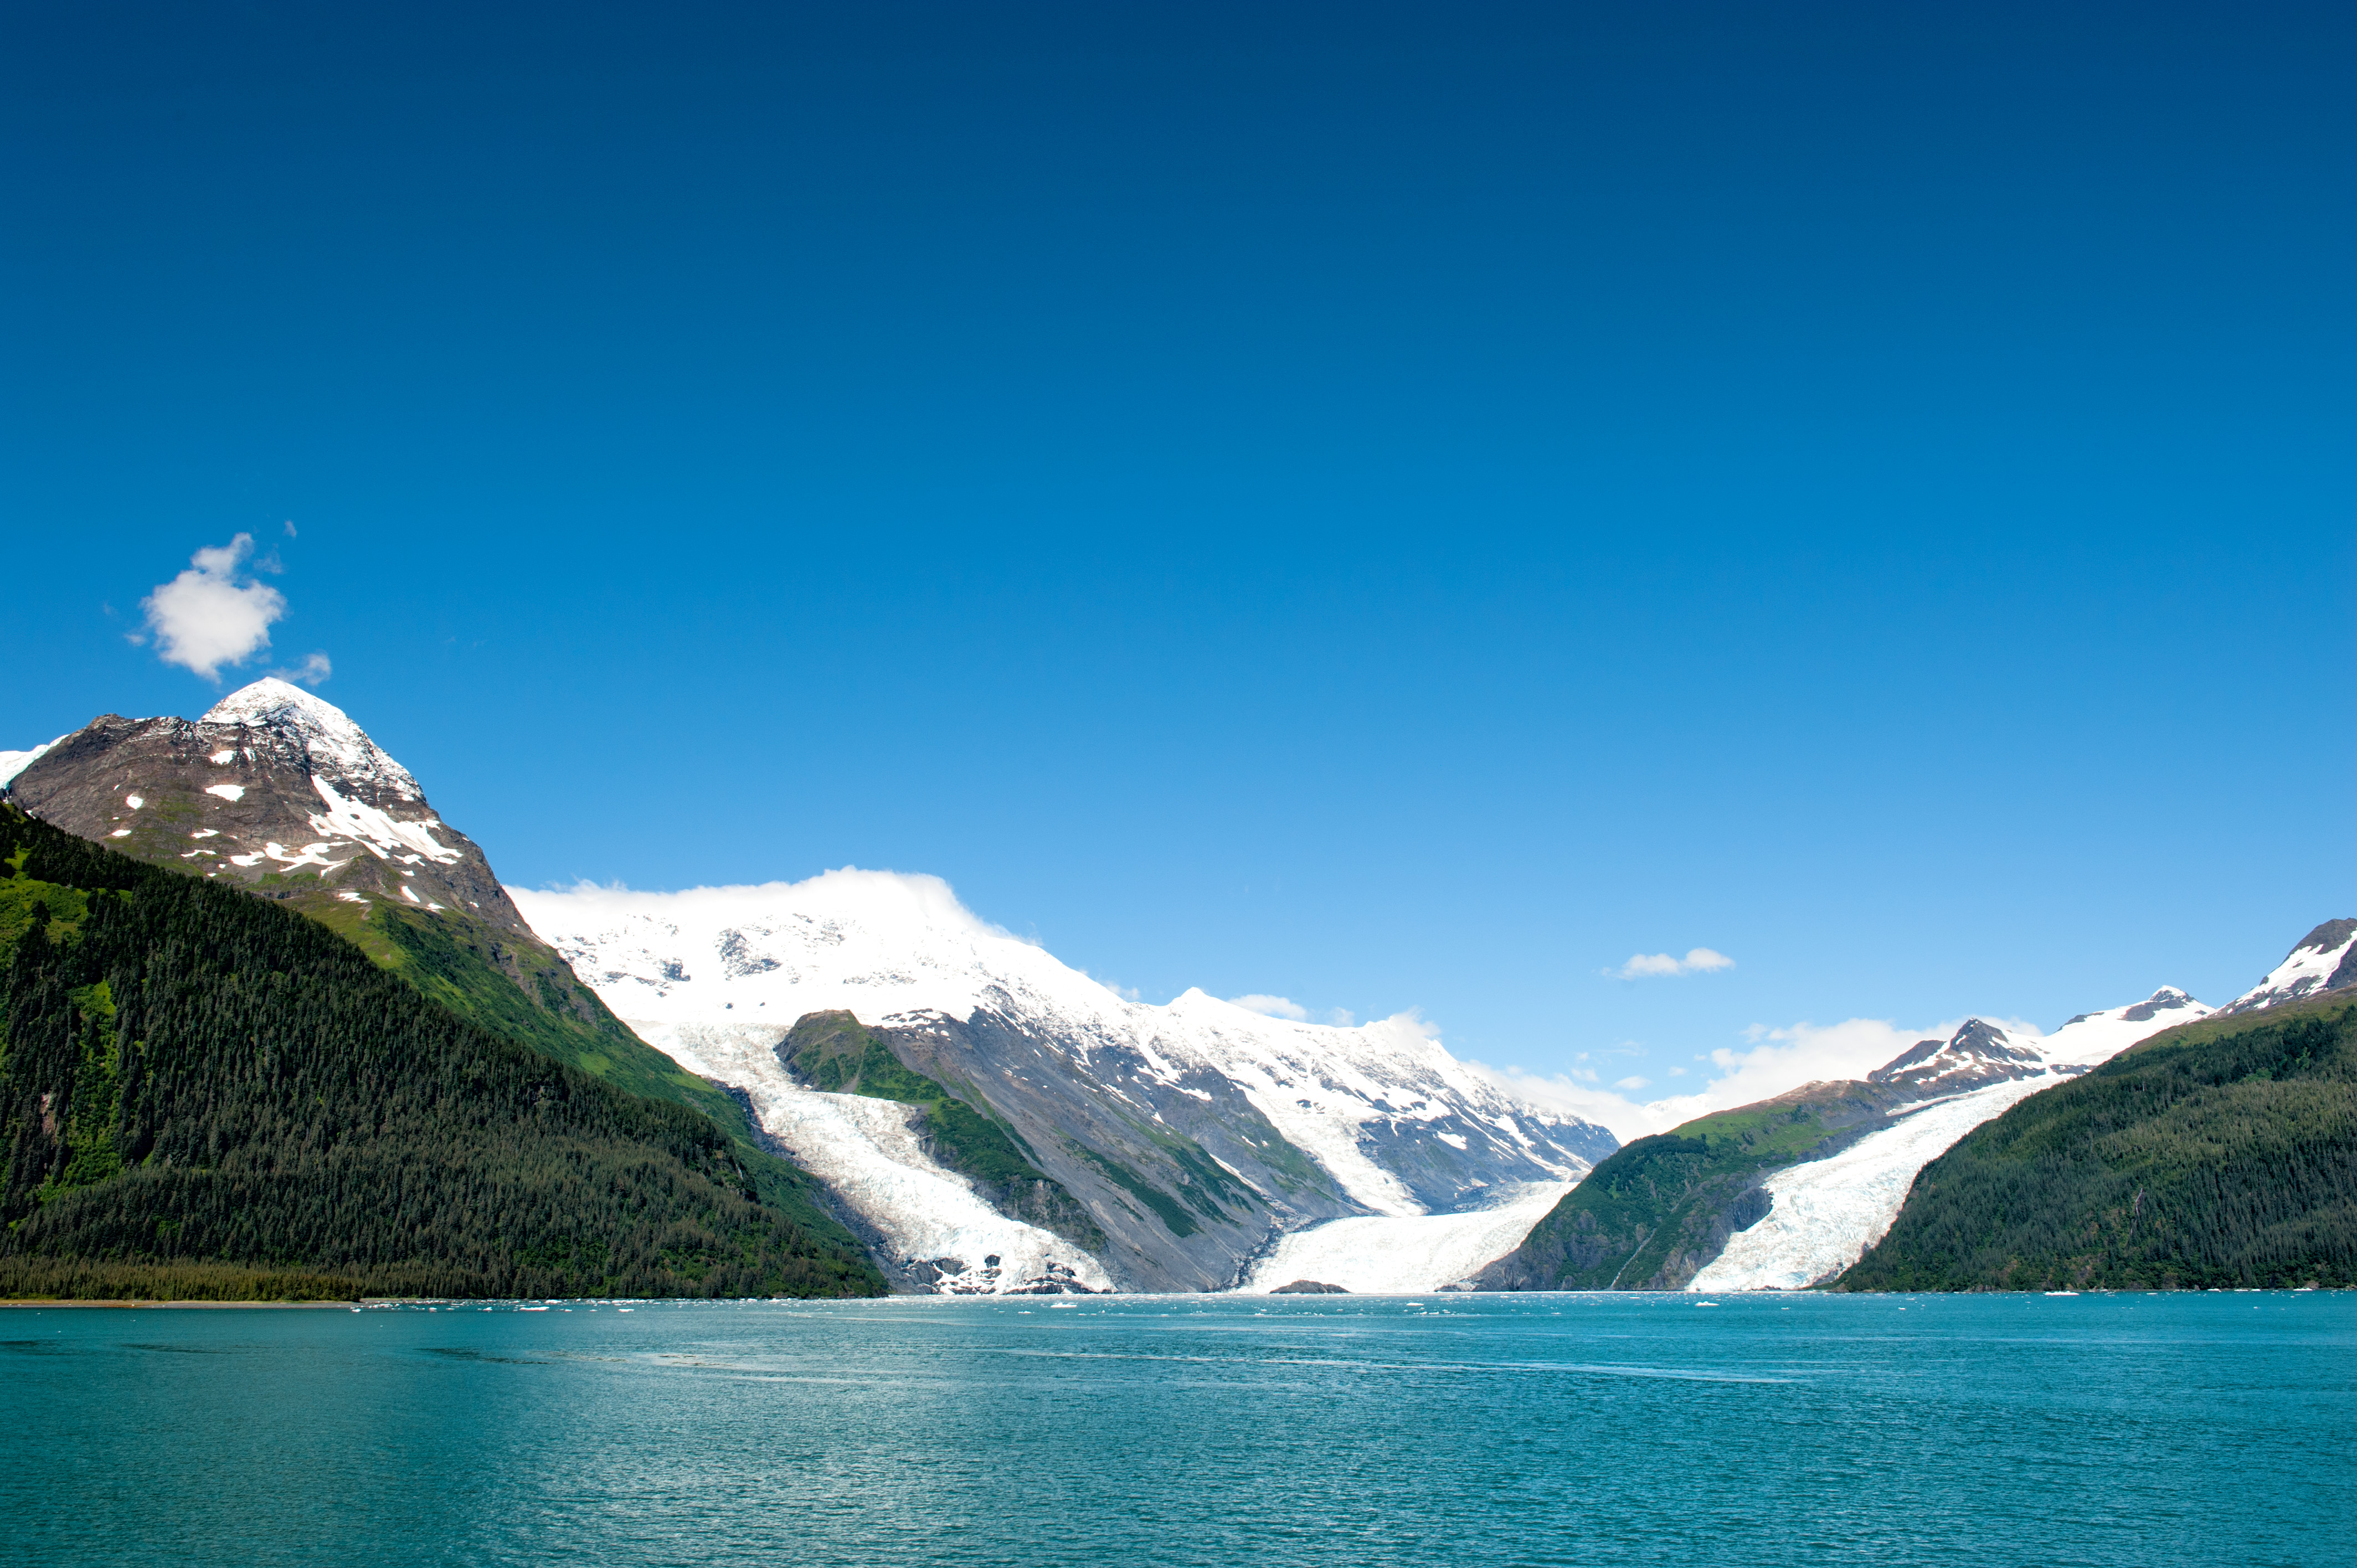 Extraordinary 8 Day Alaska Vacation to Make Memories with Your Family - Prince William Sound Glacier